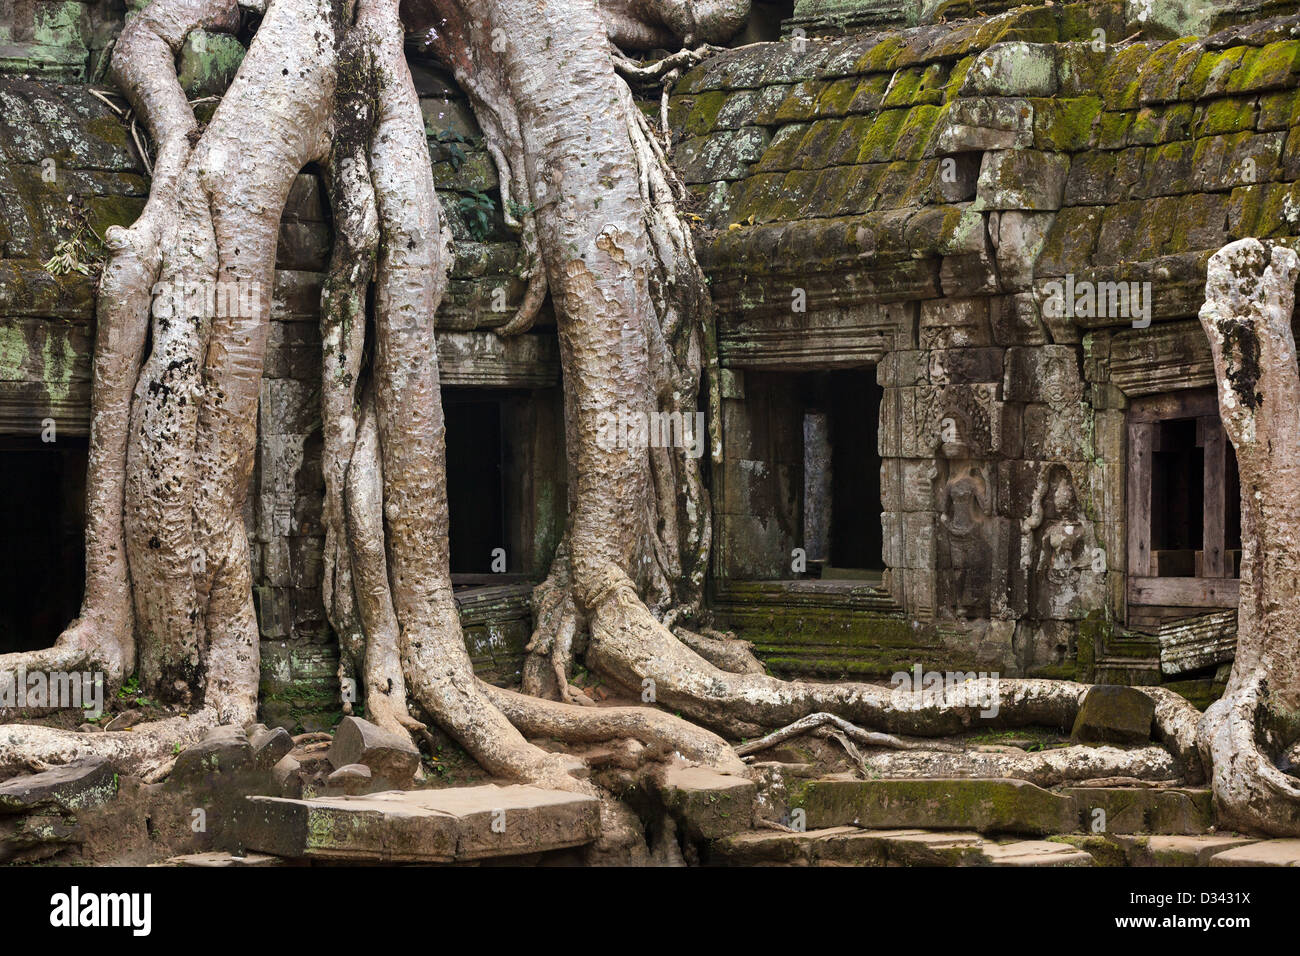 Tropical tree roots entangling Ta Prohm temple, Angkor, Cambodia Stock Photo